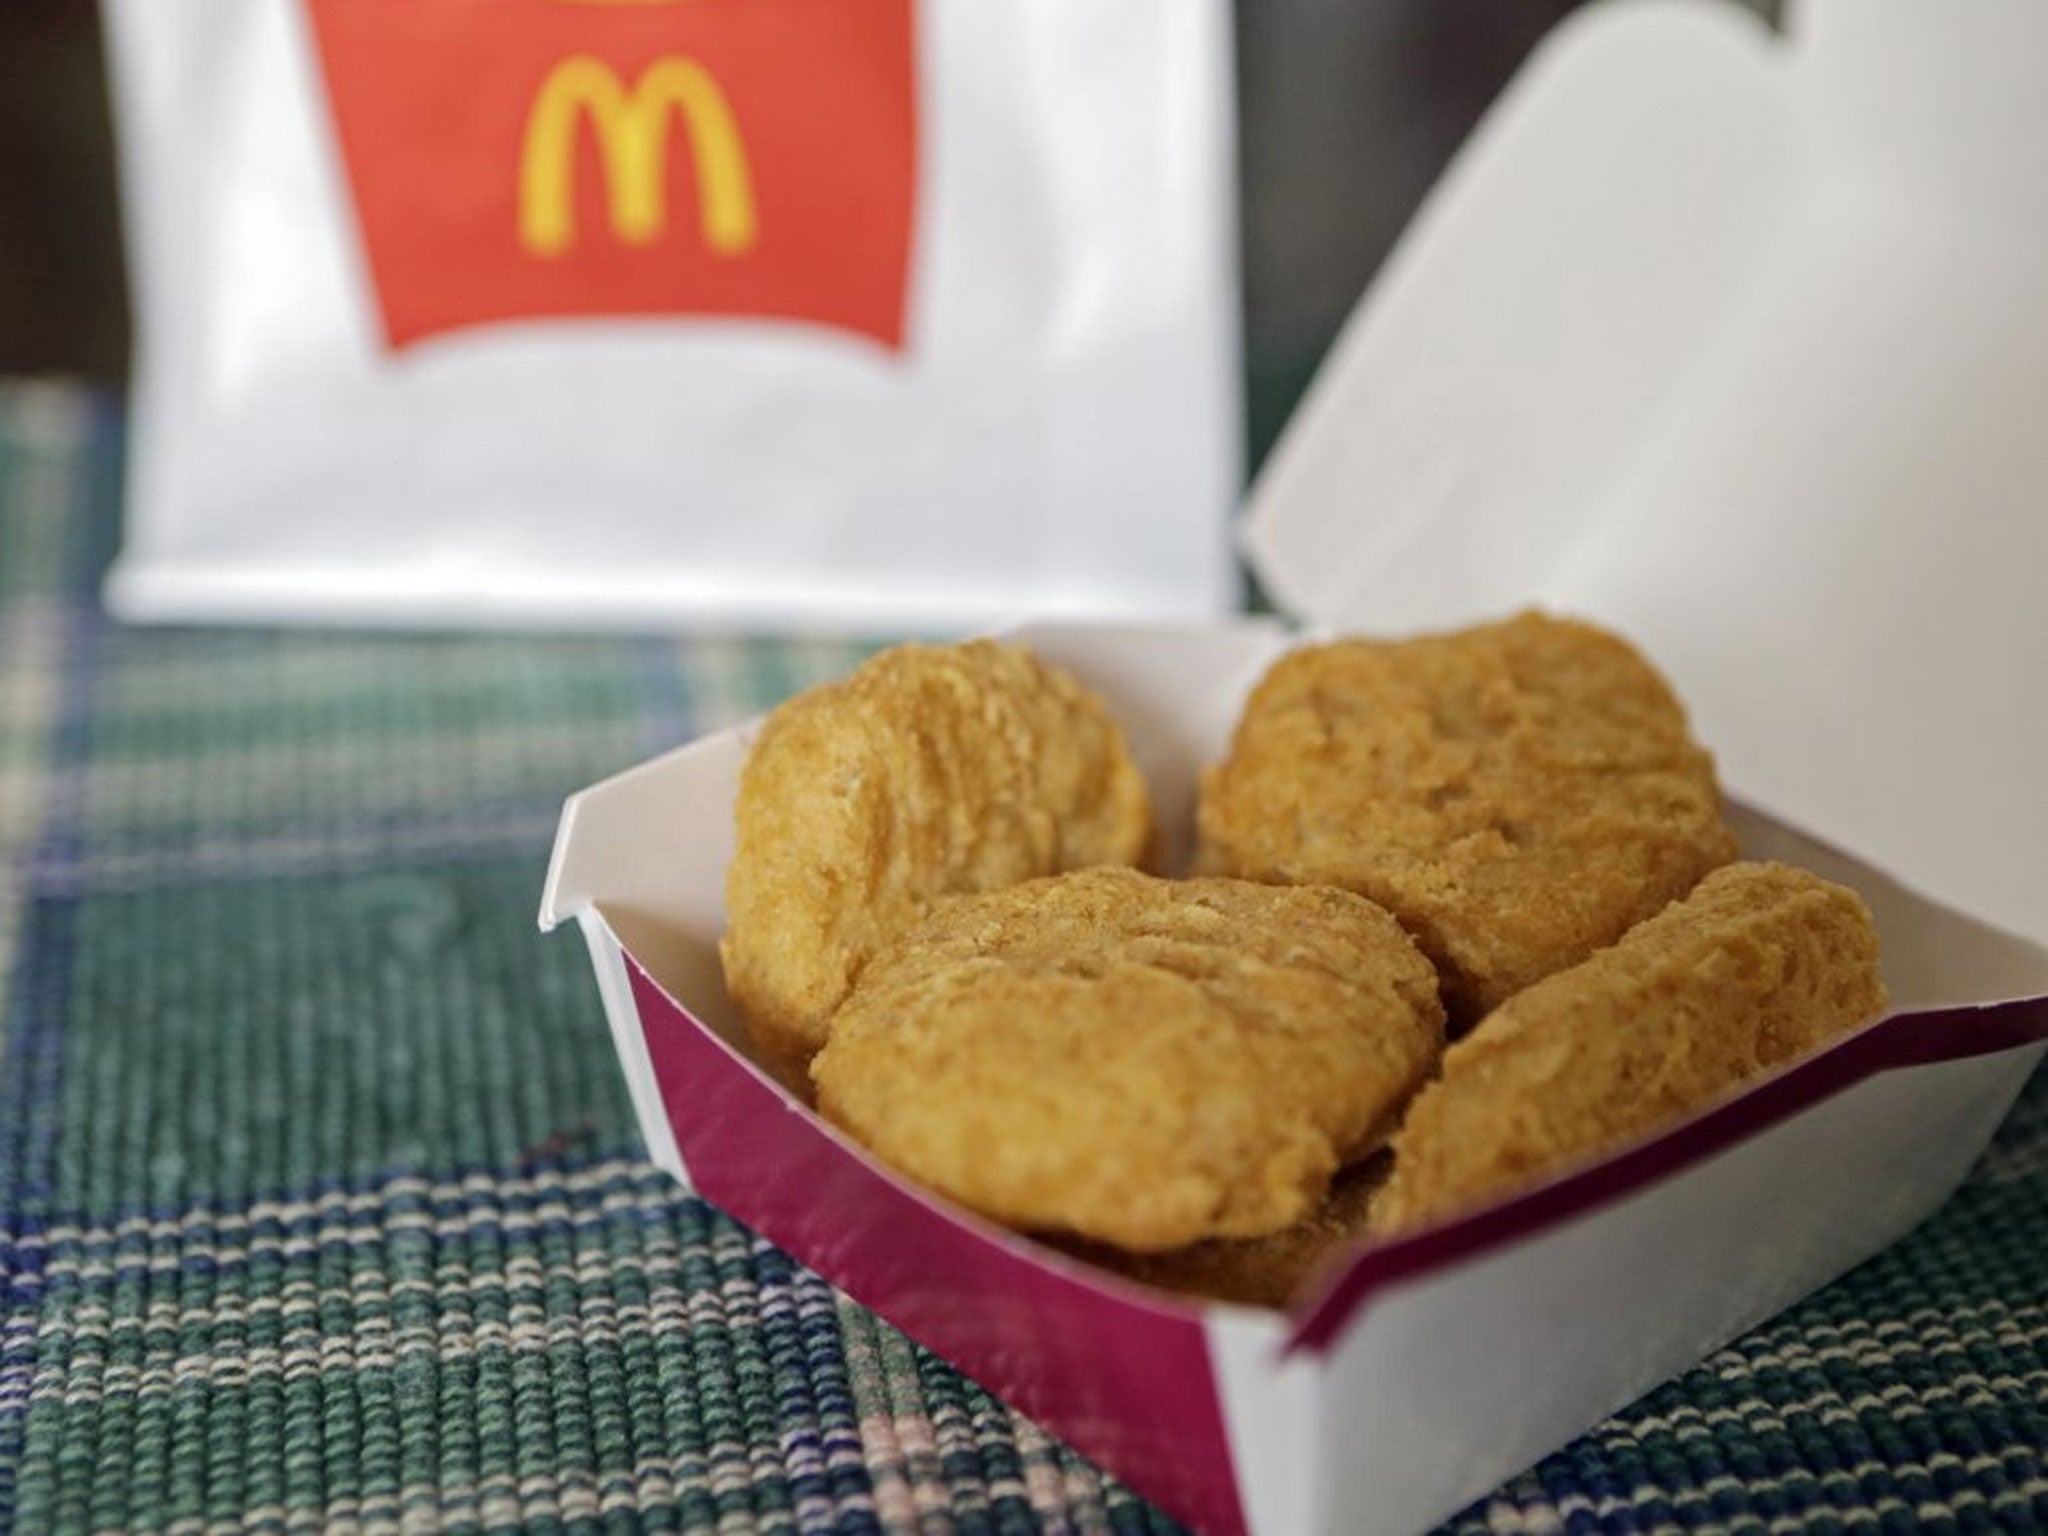 McDonald's says it plans to start using chicken raised without antibiotics important to human medicine and milk from cows that are not treated with the artificial growth hormone rbST.